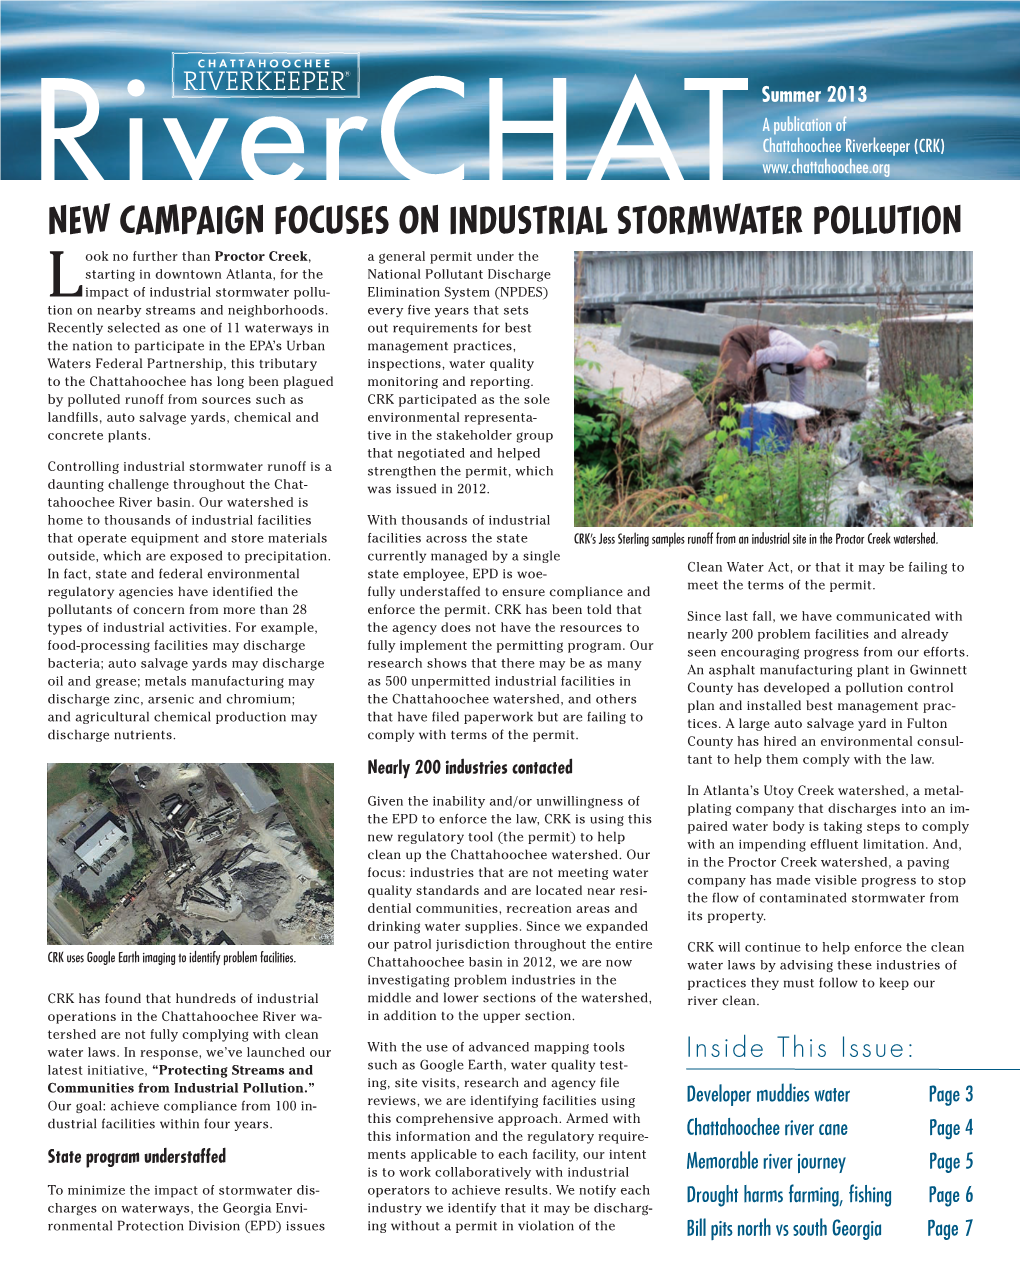 New Campaign Focuses on Industrial Stormwater Pollution